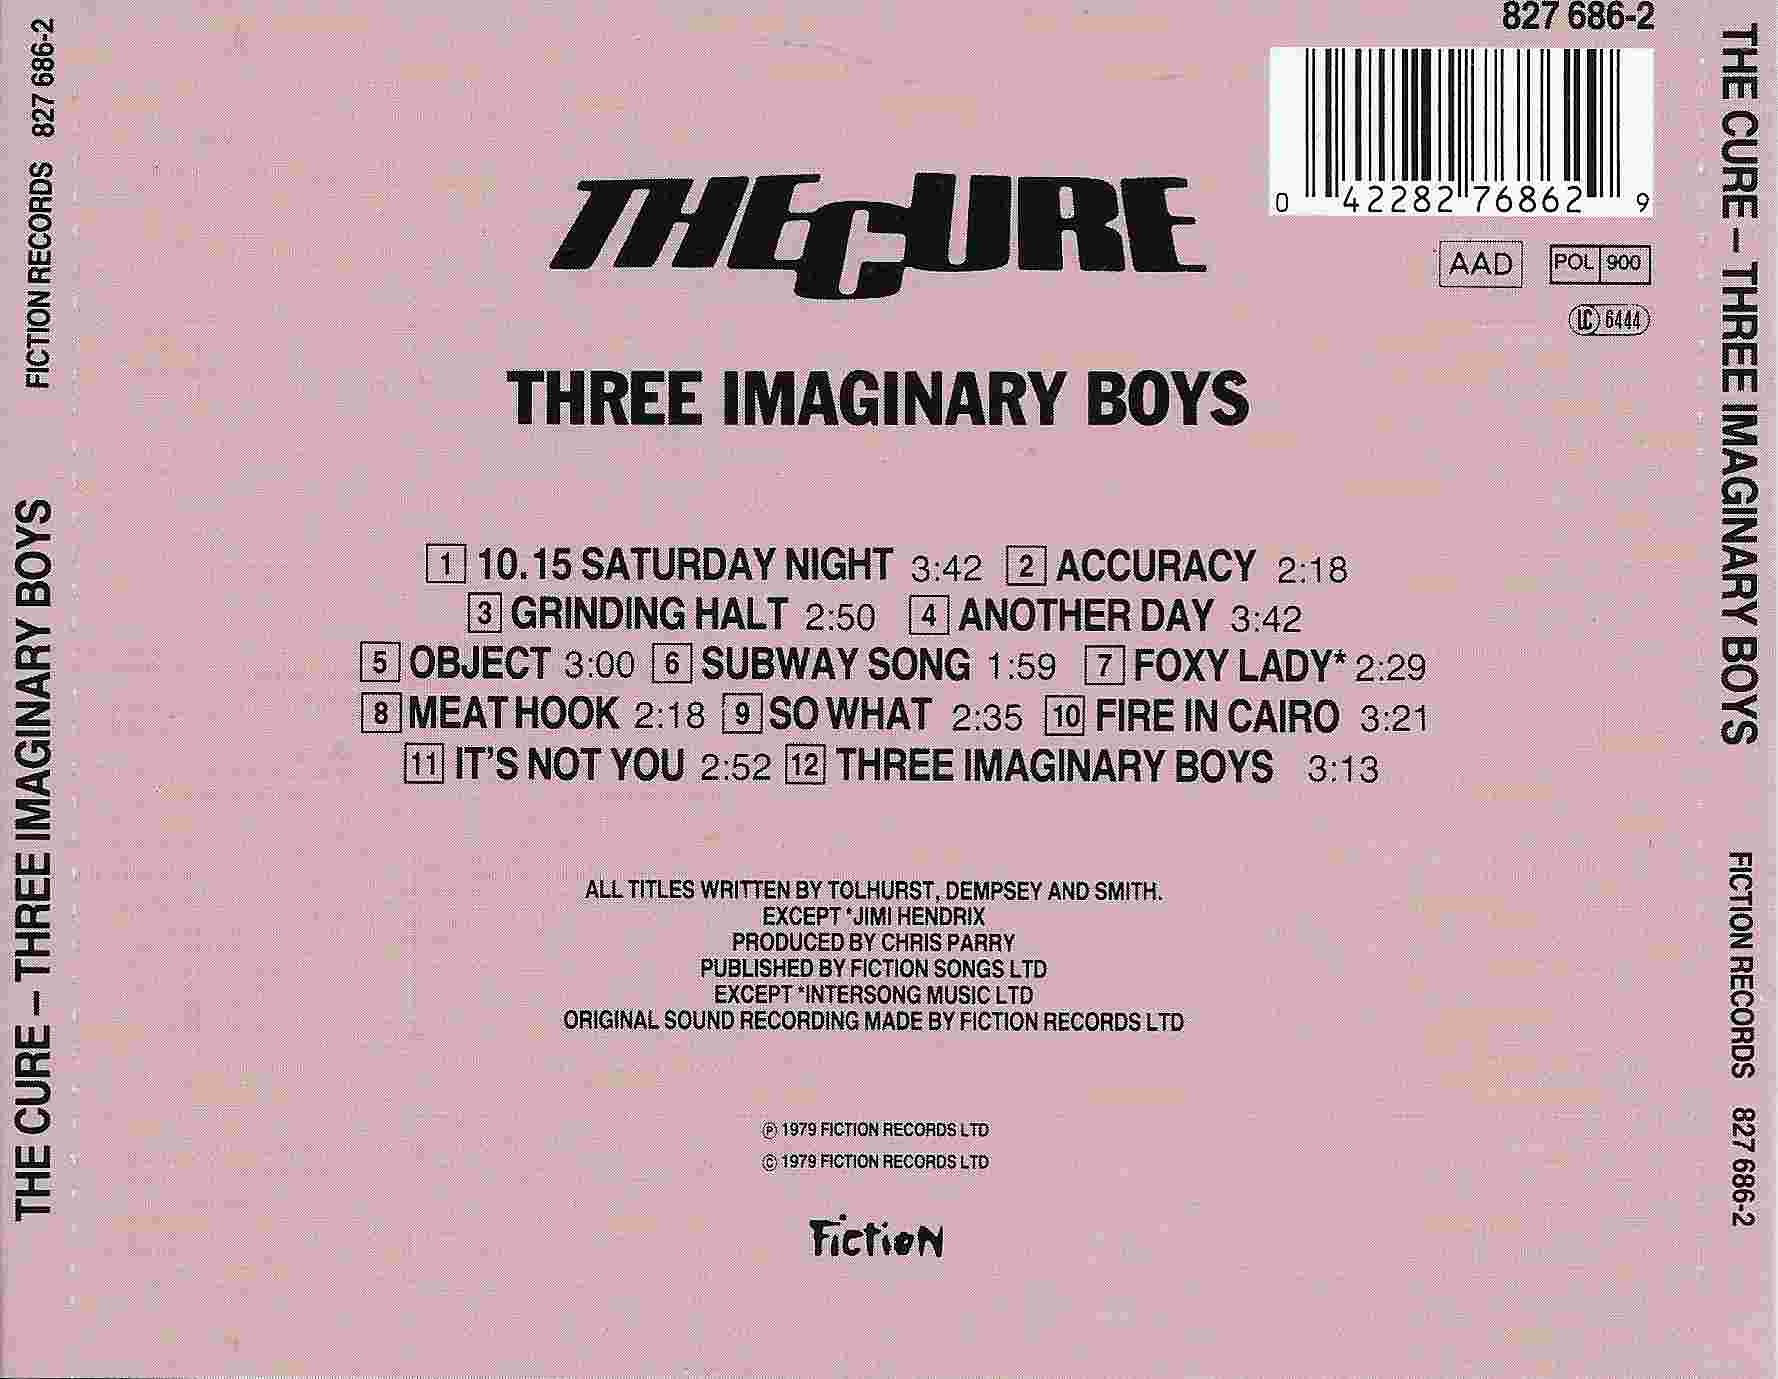 Picture of 827686 - 2 Three imaginary boys by artist The Cure 